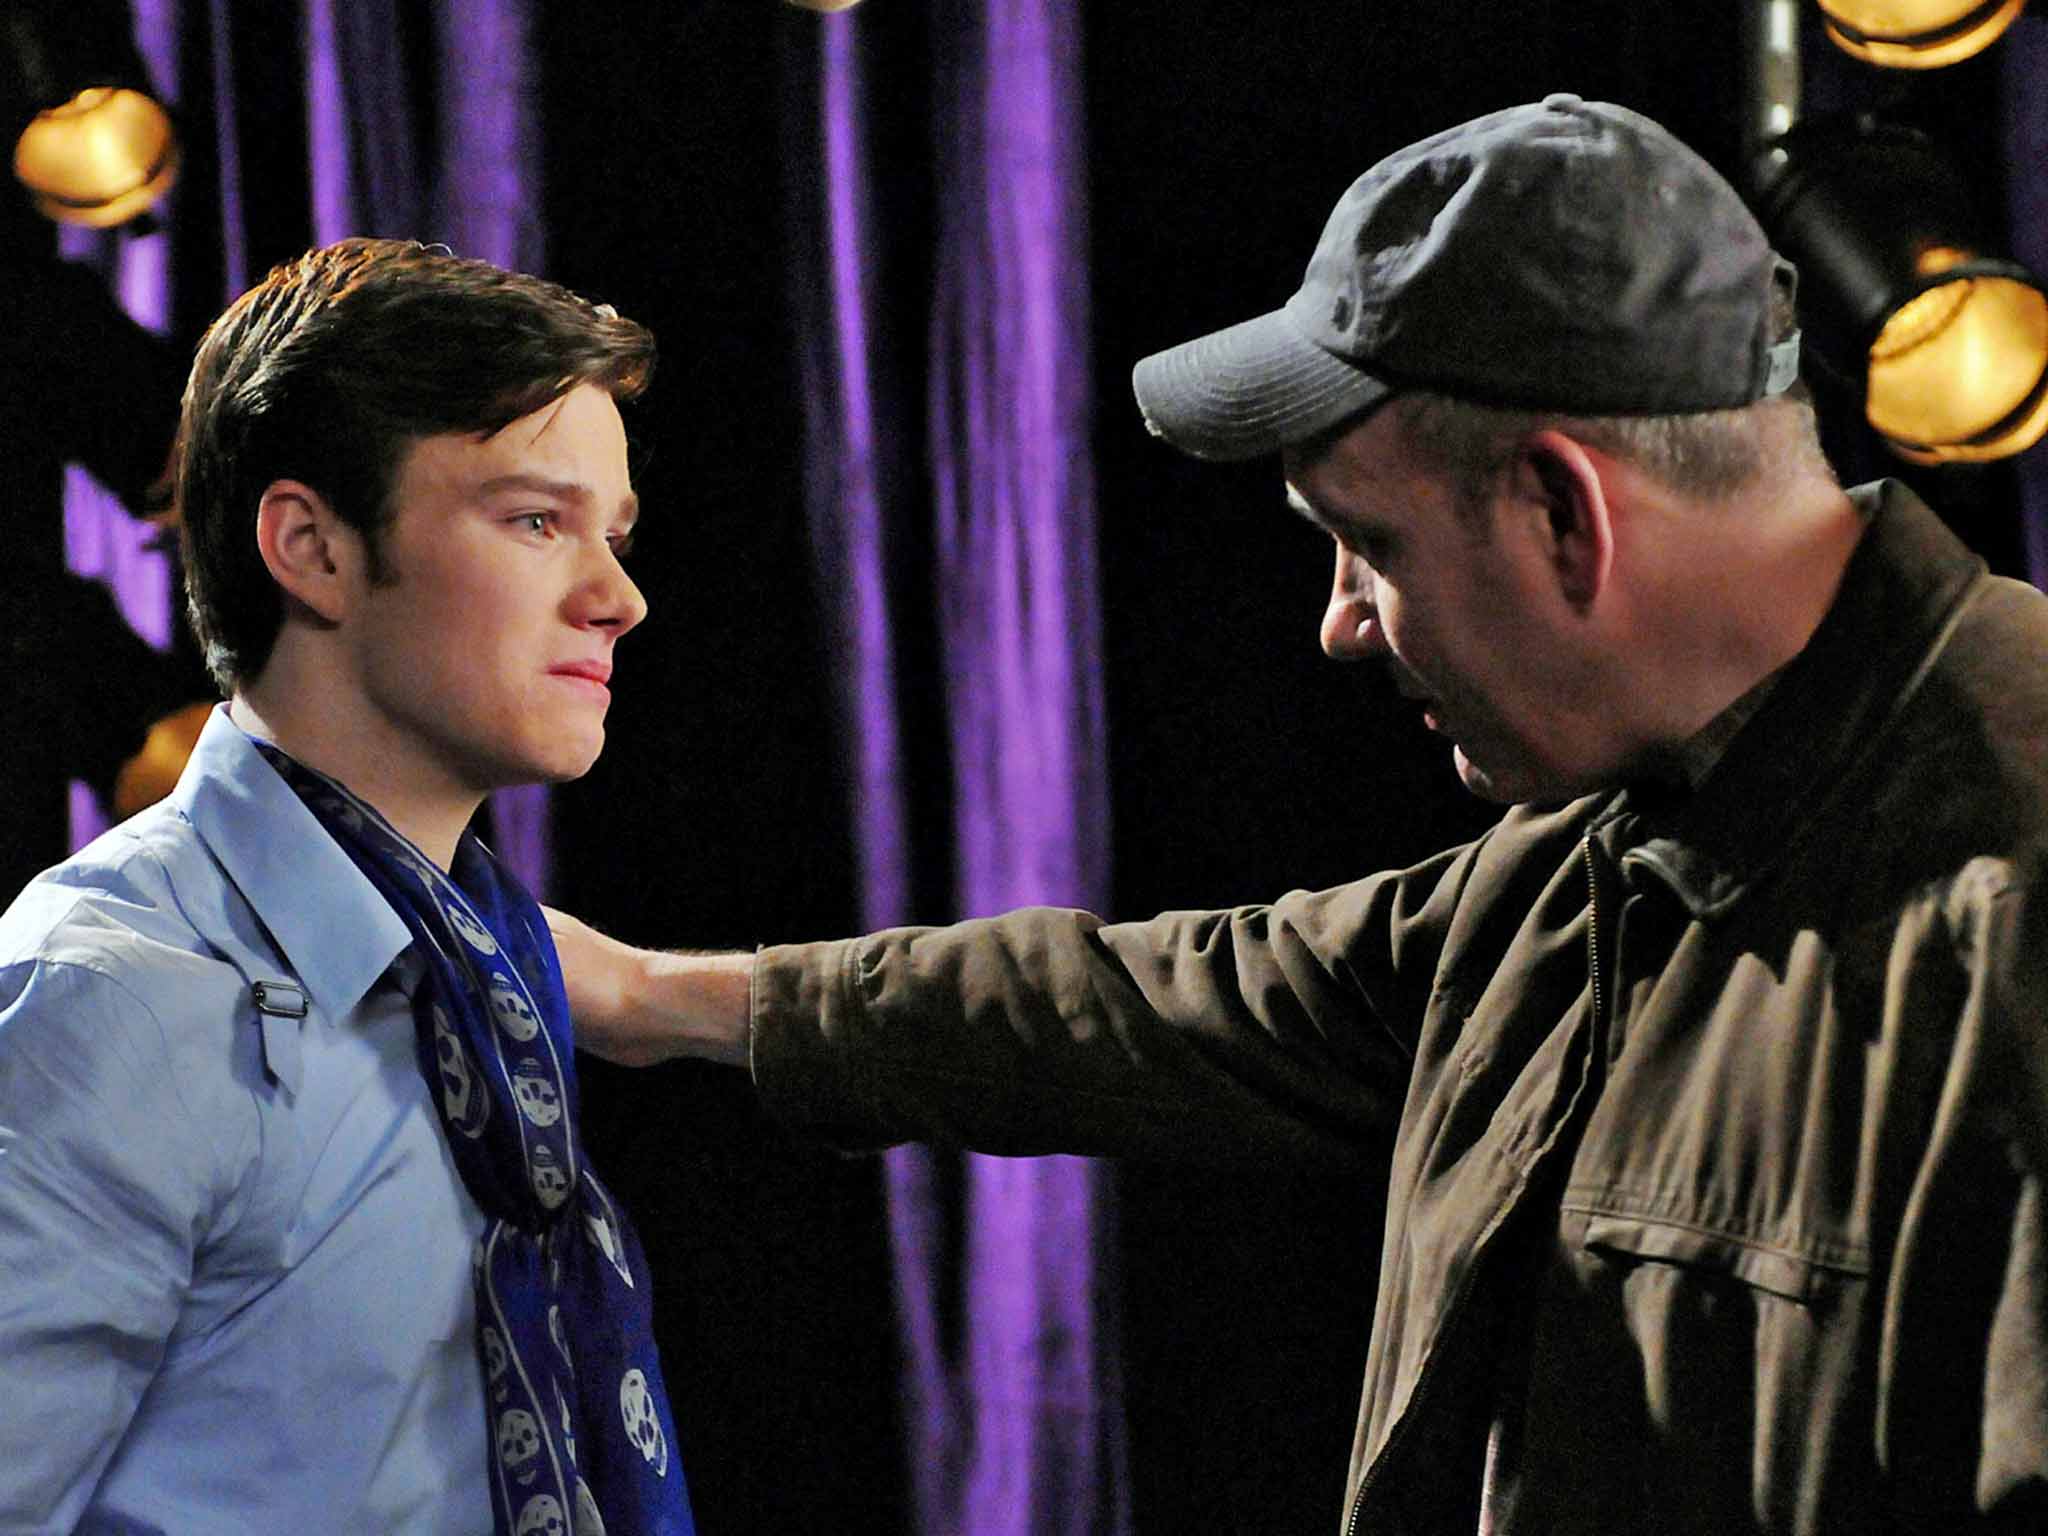 Out and about: for 'Glee' character Bert Hummel, having a gay son was a learning curve